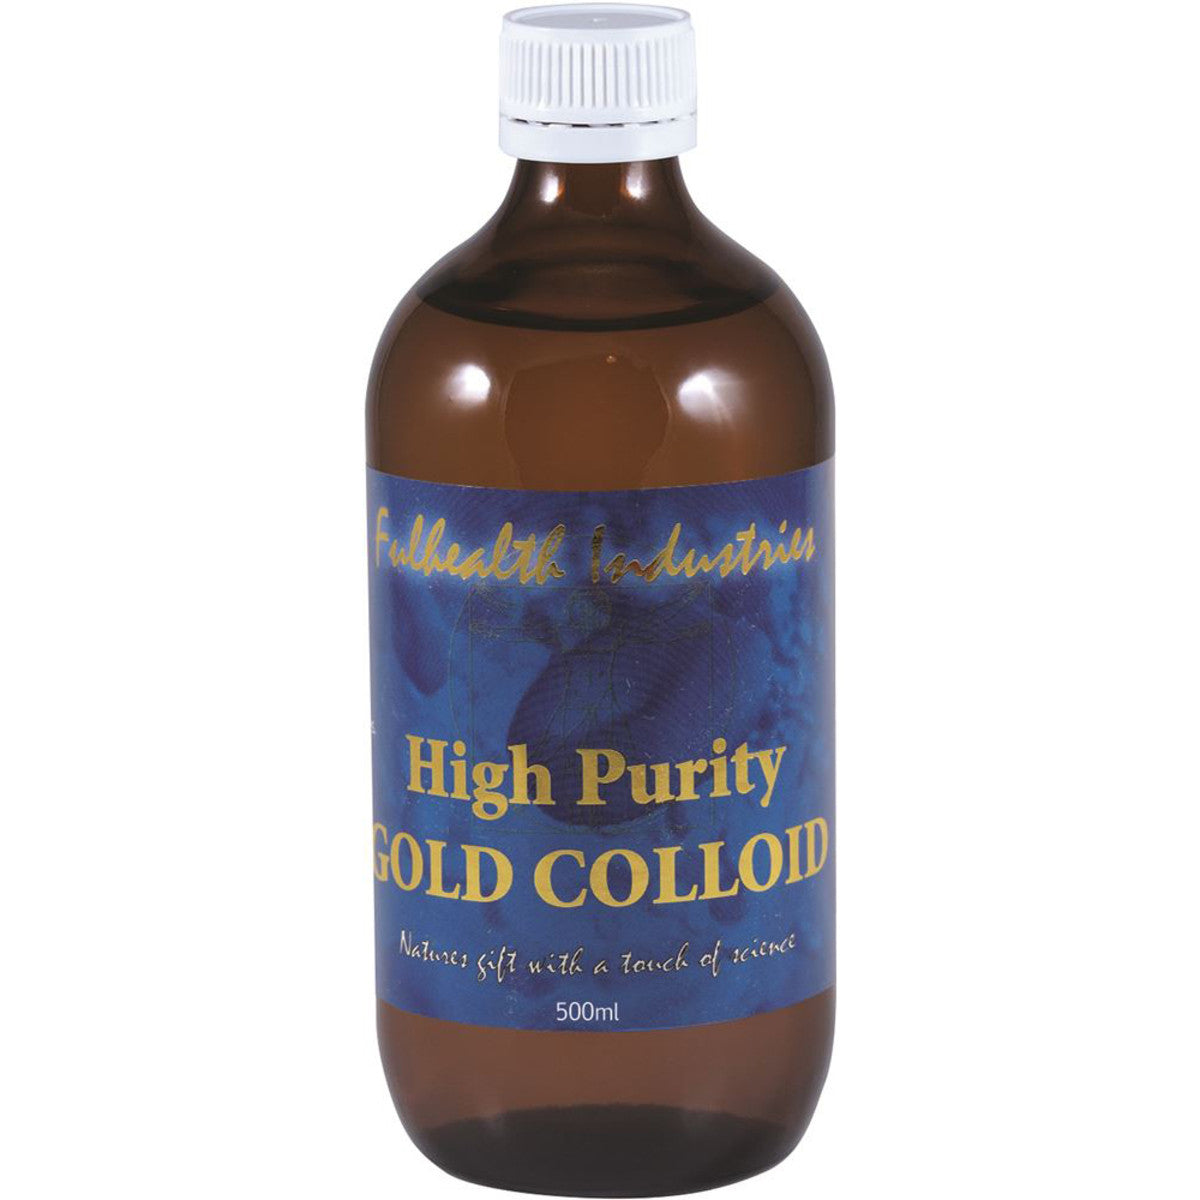 Fulhealth Industries - Gold Colloid